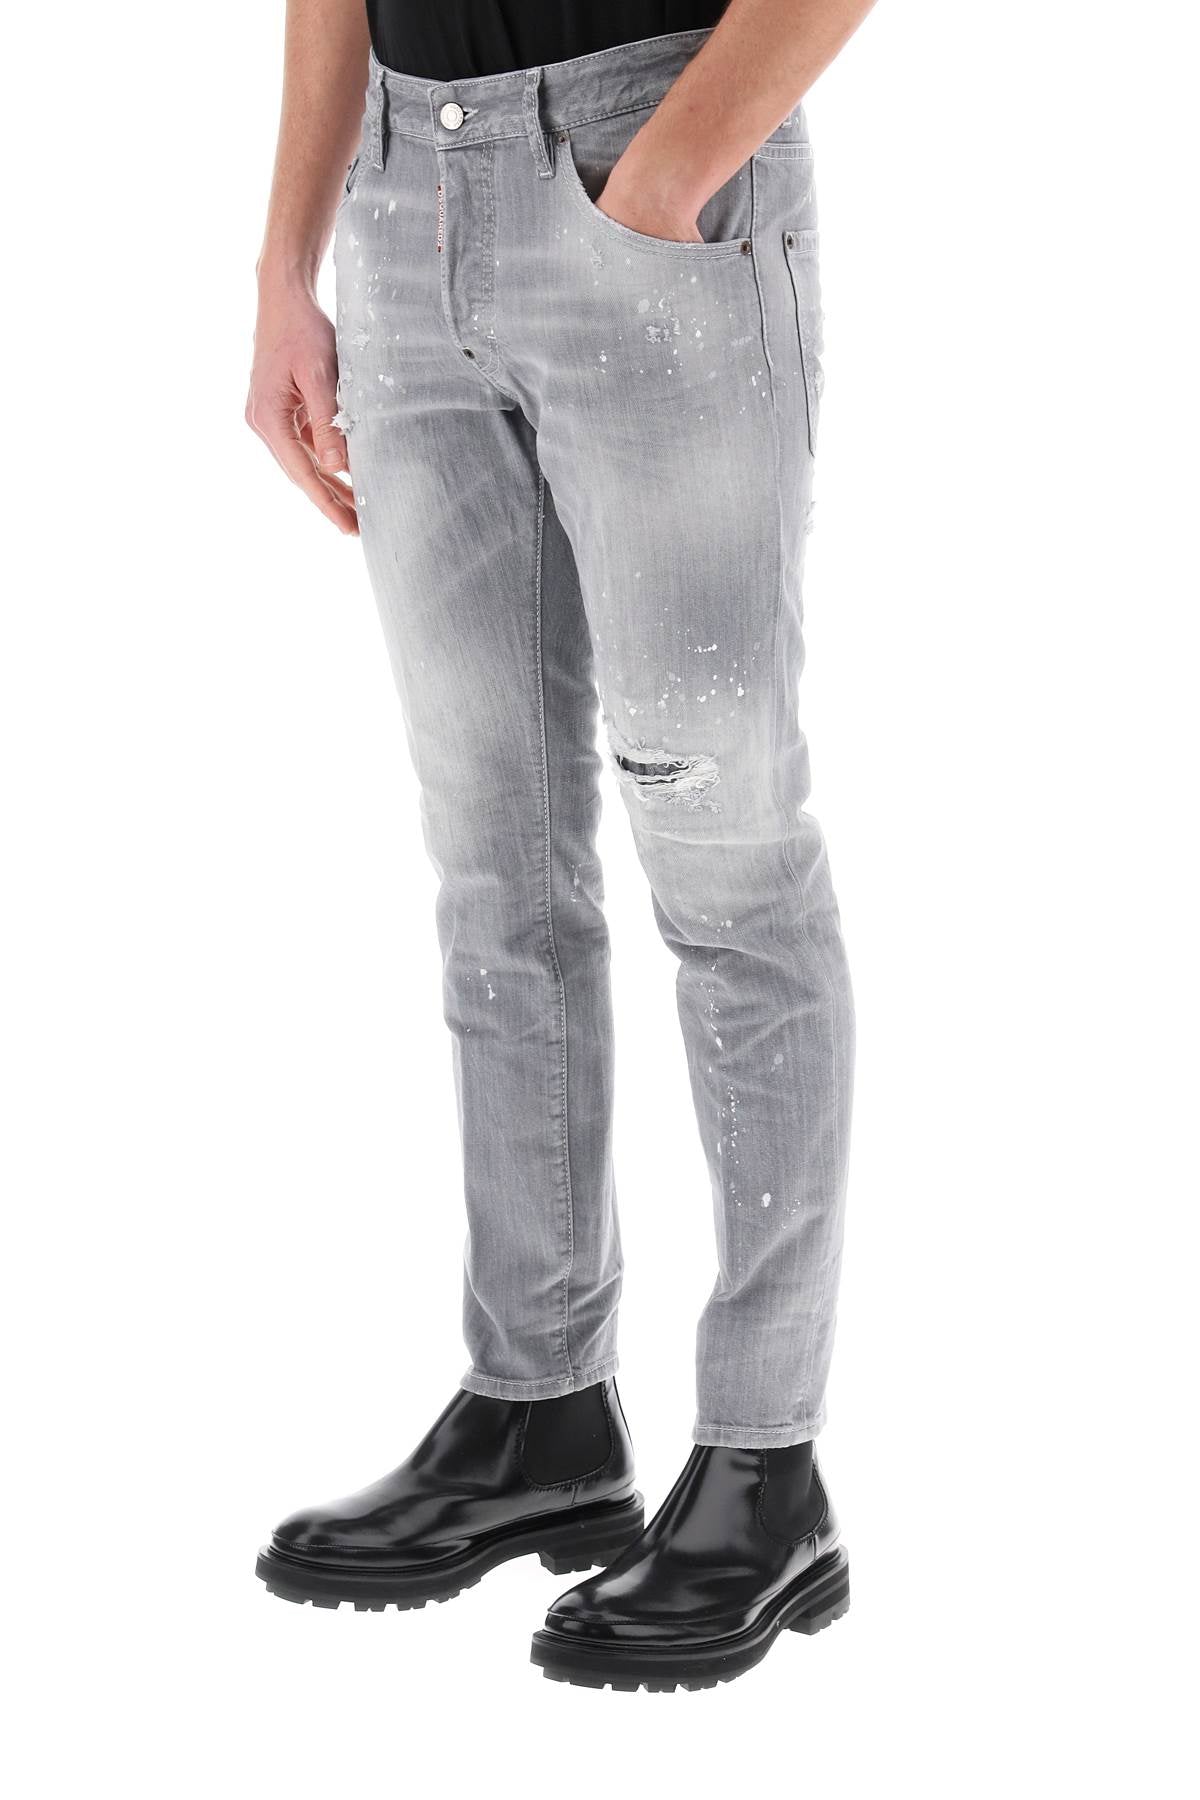 Dsquared2 Dsquared2 skater jeans in grey spotted wash